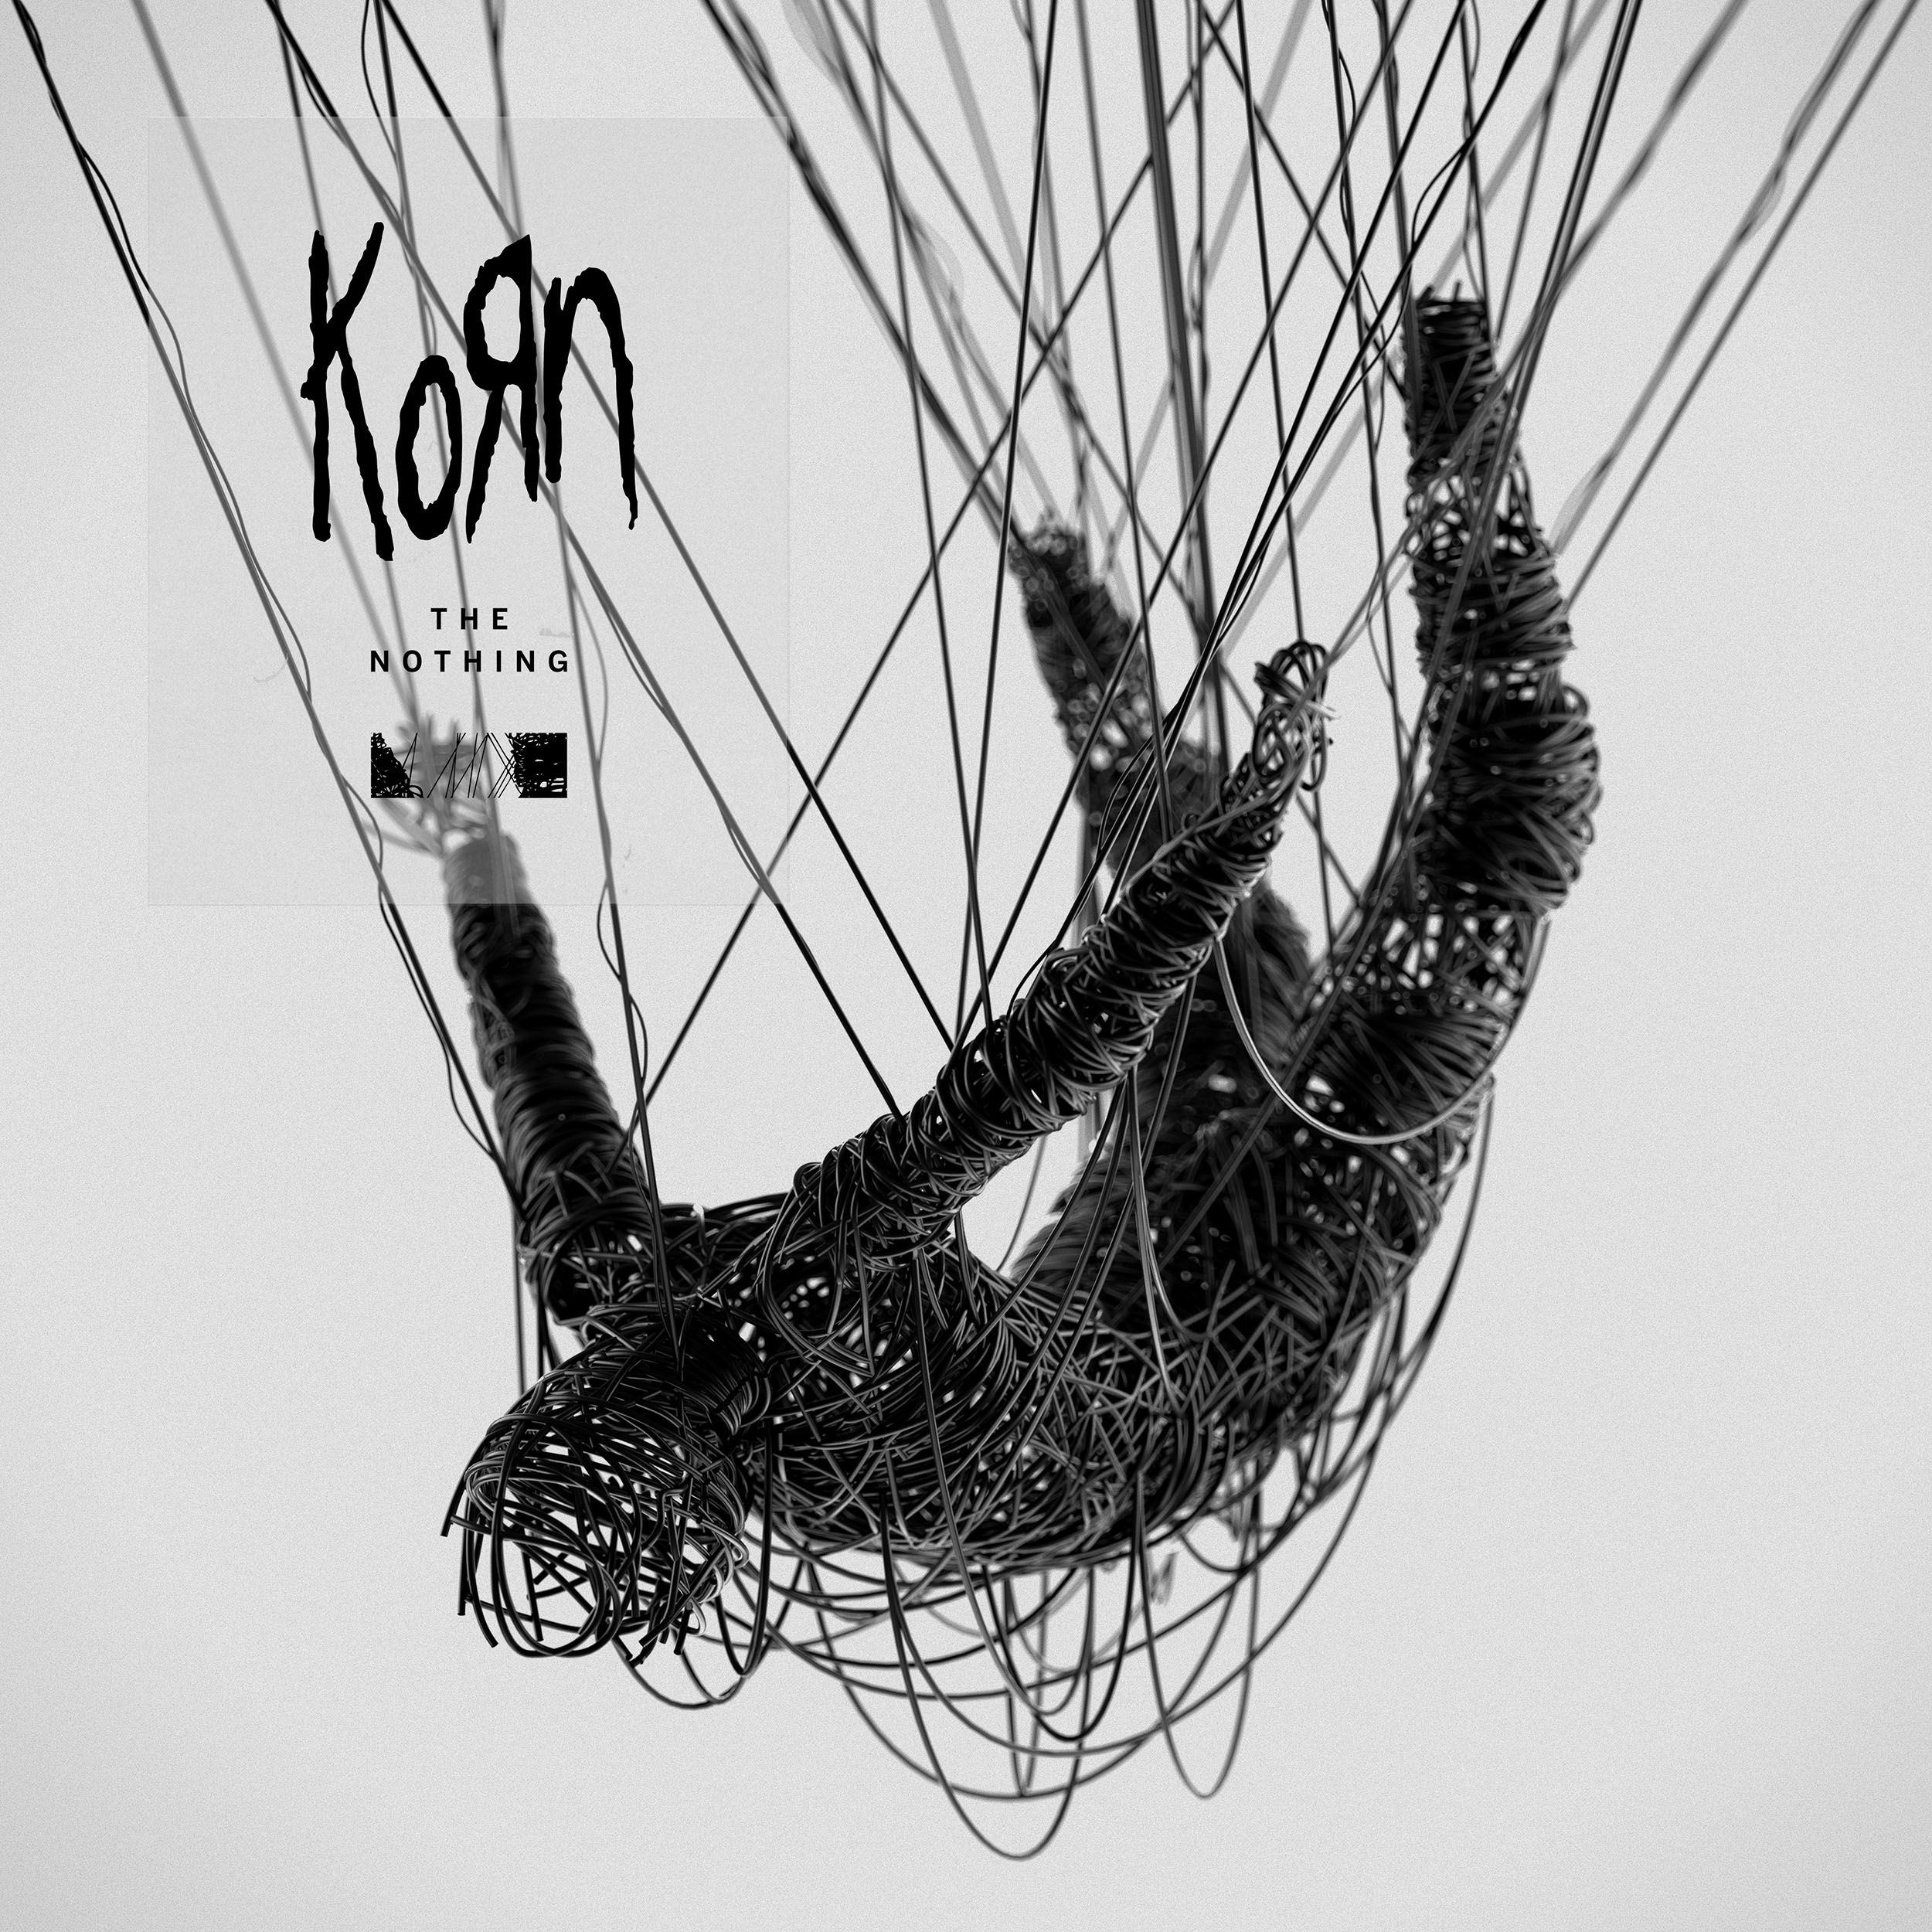 Korn: New Album Details, New Track "You'll Never Find Me" Out Now